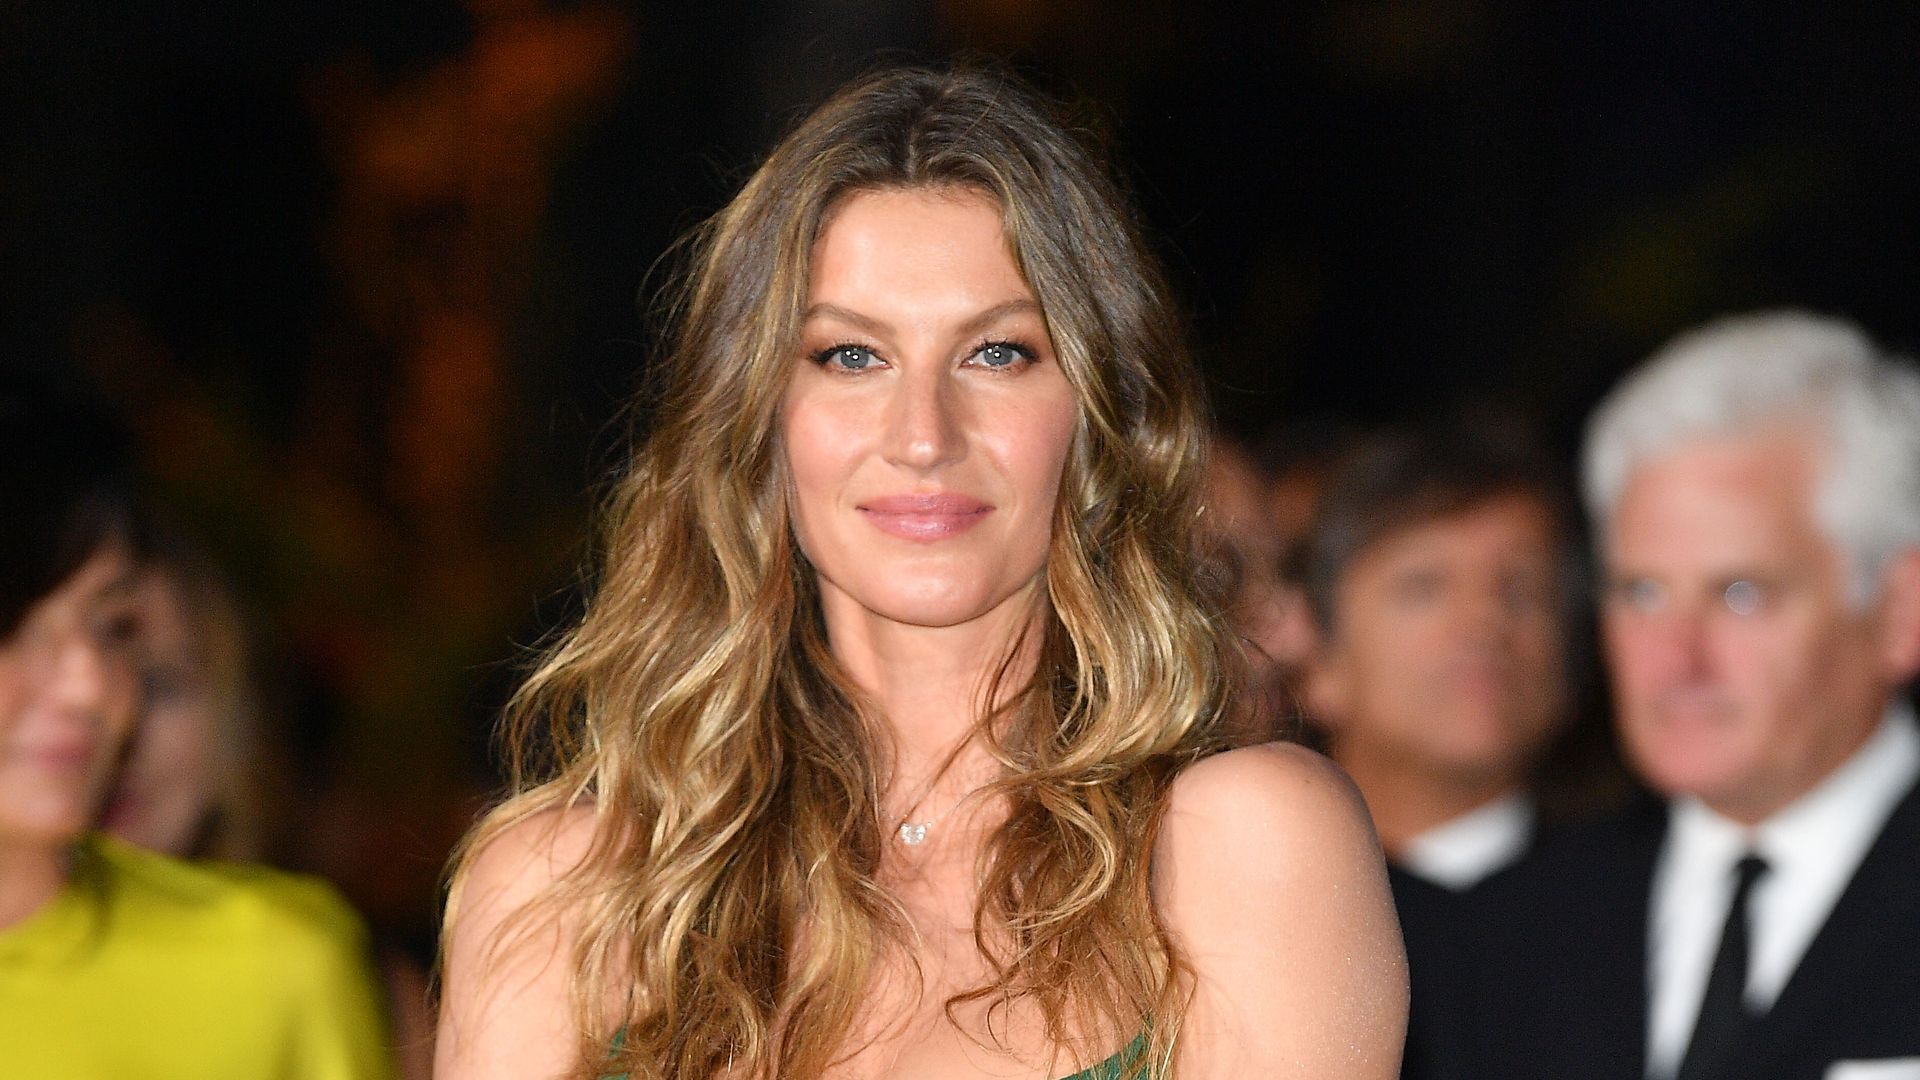 Gisele Bndchen attends the Green Carpet Fashion Awards Italia 2017 during Milan Fashion Week Spring/Summer 2018 on September 24, 2017 in Milan, Italy